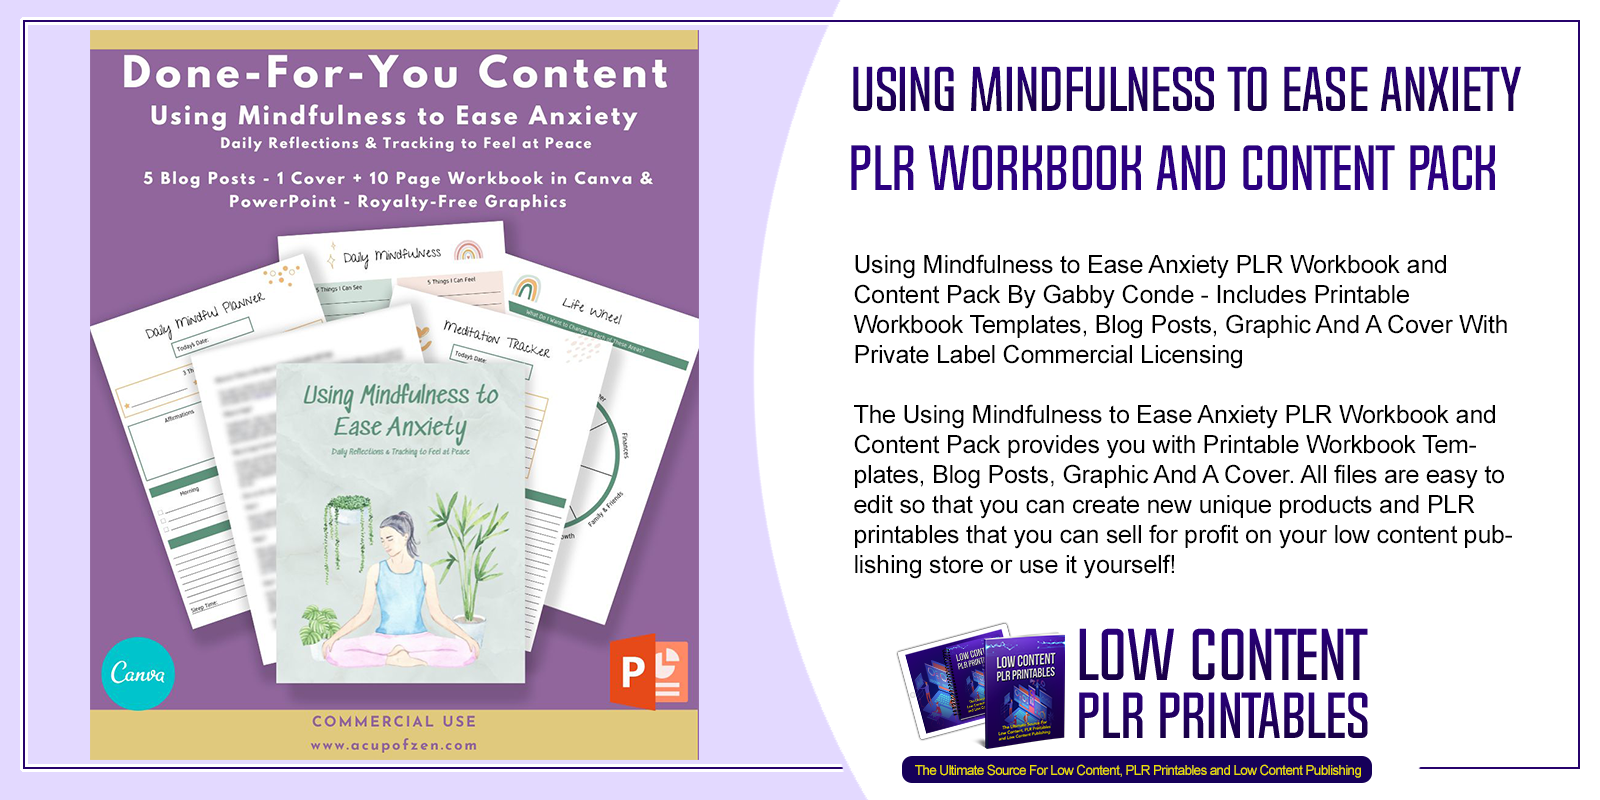 Using Mindfulness to Ease Anxiety PLR Workbook and Content Pack